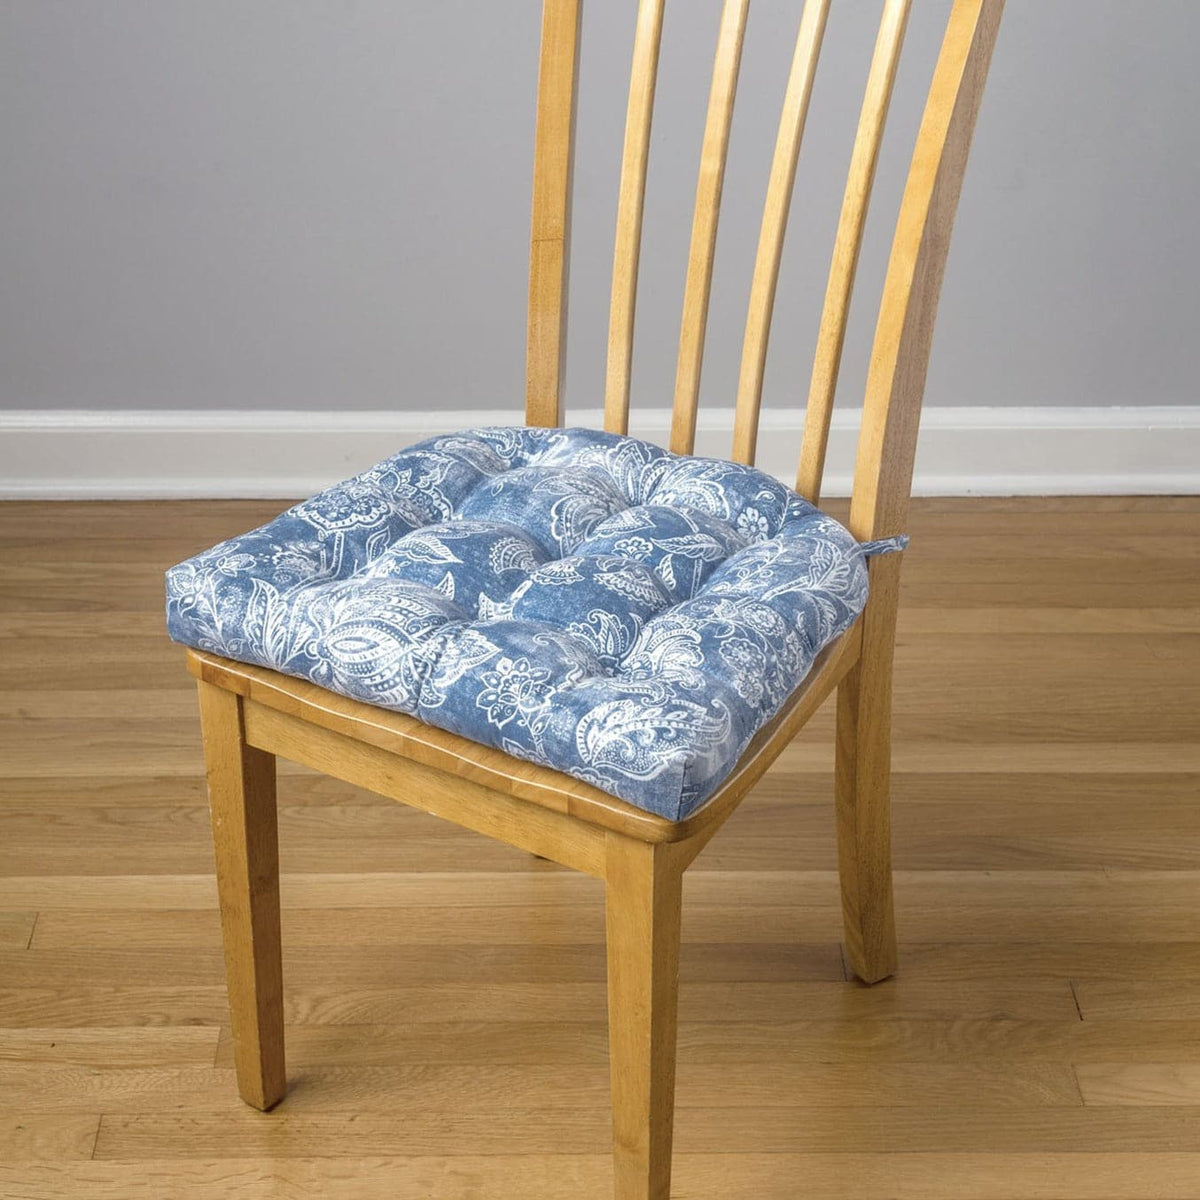 Brisbane Colonial Blue Dining Chair Pads - Latex Foam Fill, Reversible -  Made in USA